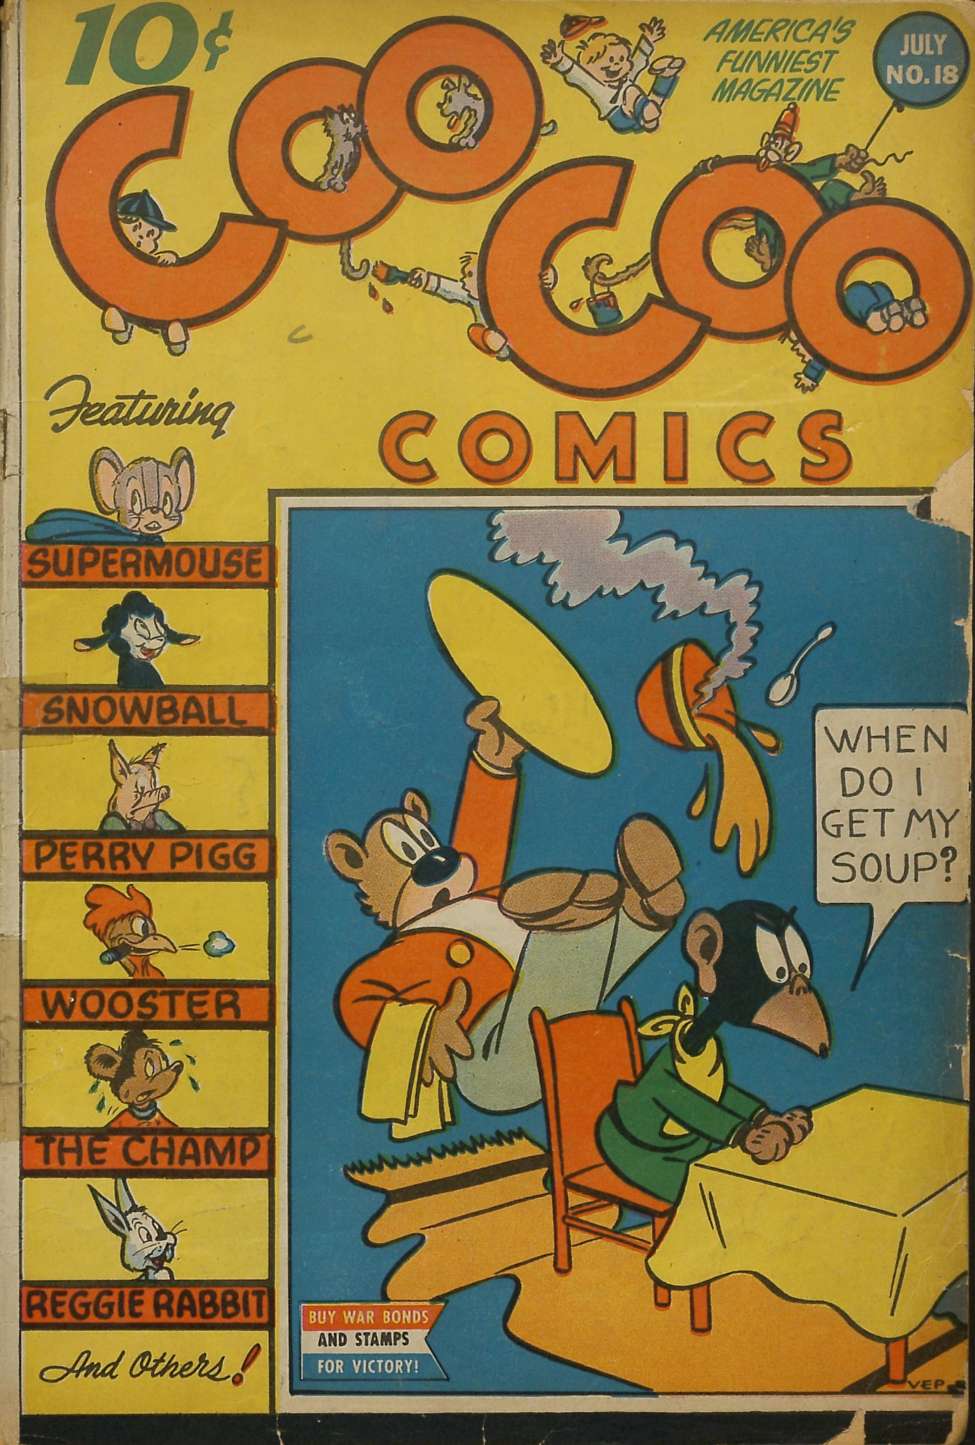 Book Cover For Coo Coo Comics 18